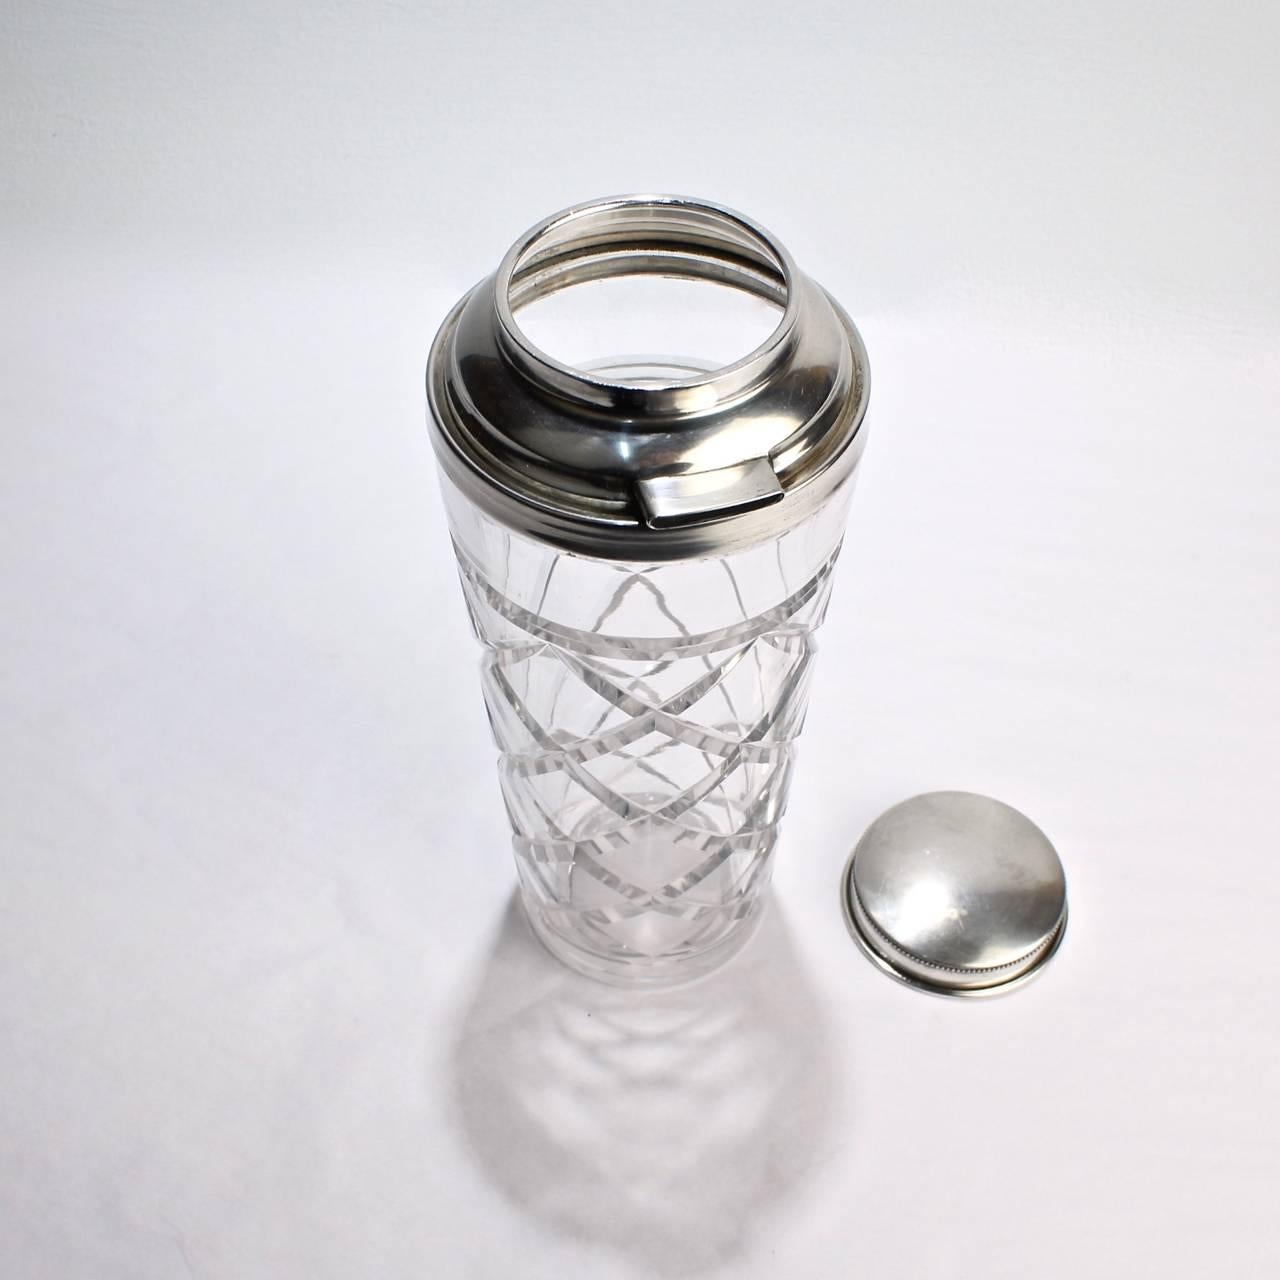 American Art Deco Cut-Glass and Sterling Silver Cocktail Shaker by Webster & Co 1